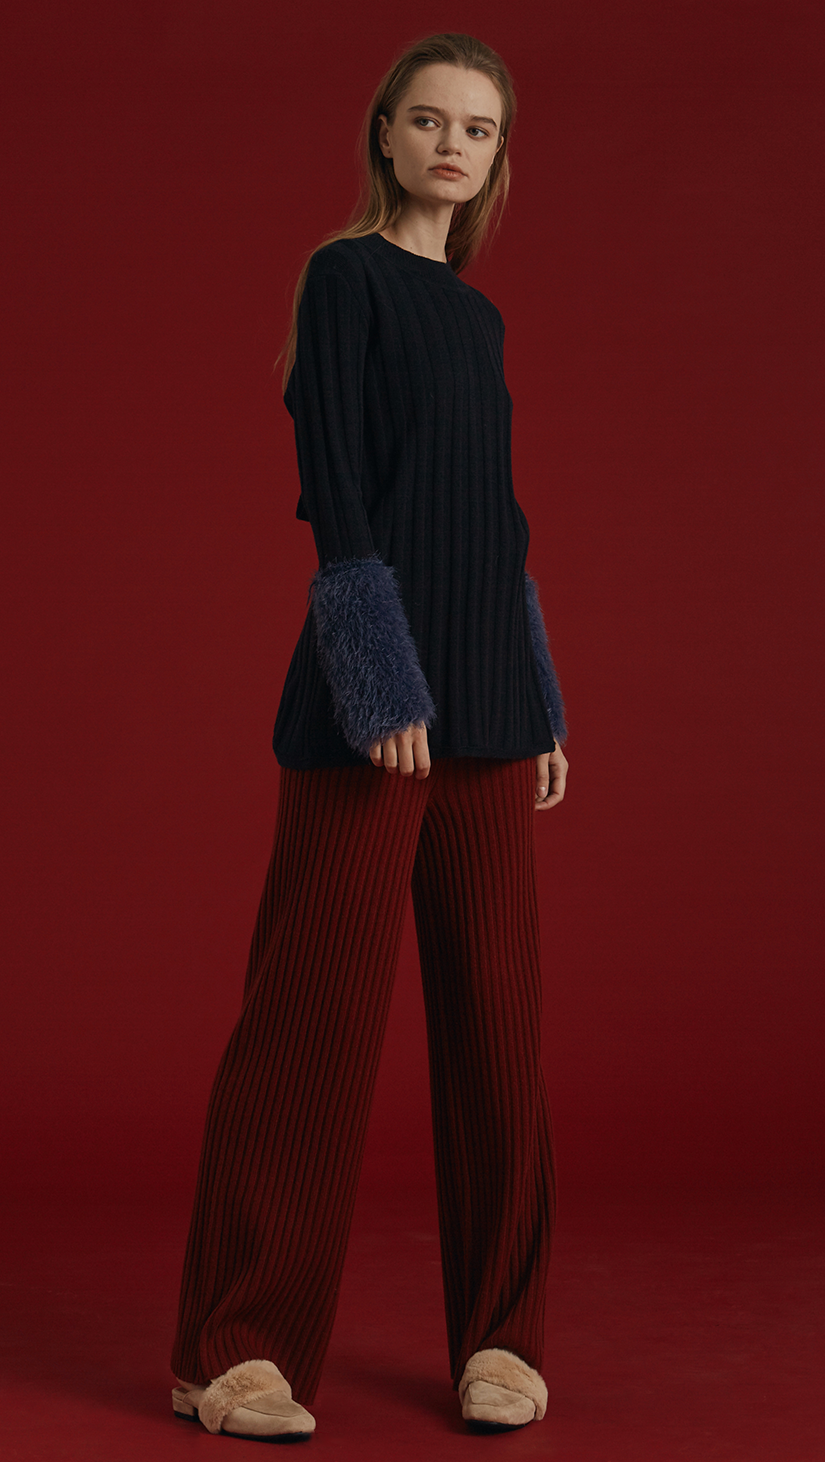 The Mikaela Pant is brick wool trousers sit high on the waist with an elasticated ribbed-knit trim. Wide leg cut. Extra long in length. No pockets. Warm and super soft wool fabric. Relaxed fit. Wholegarment Made.